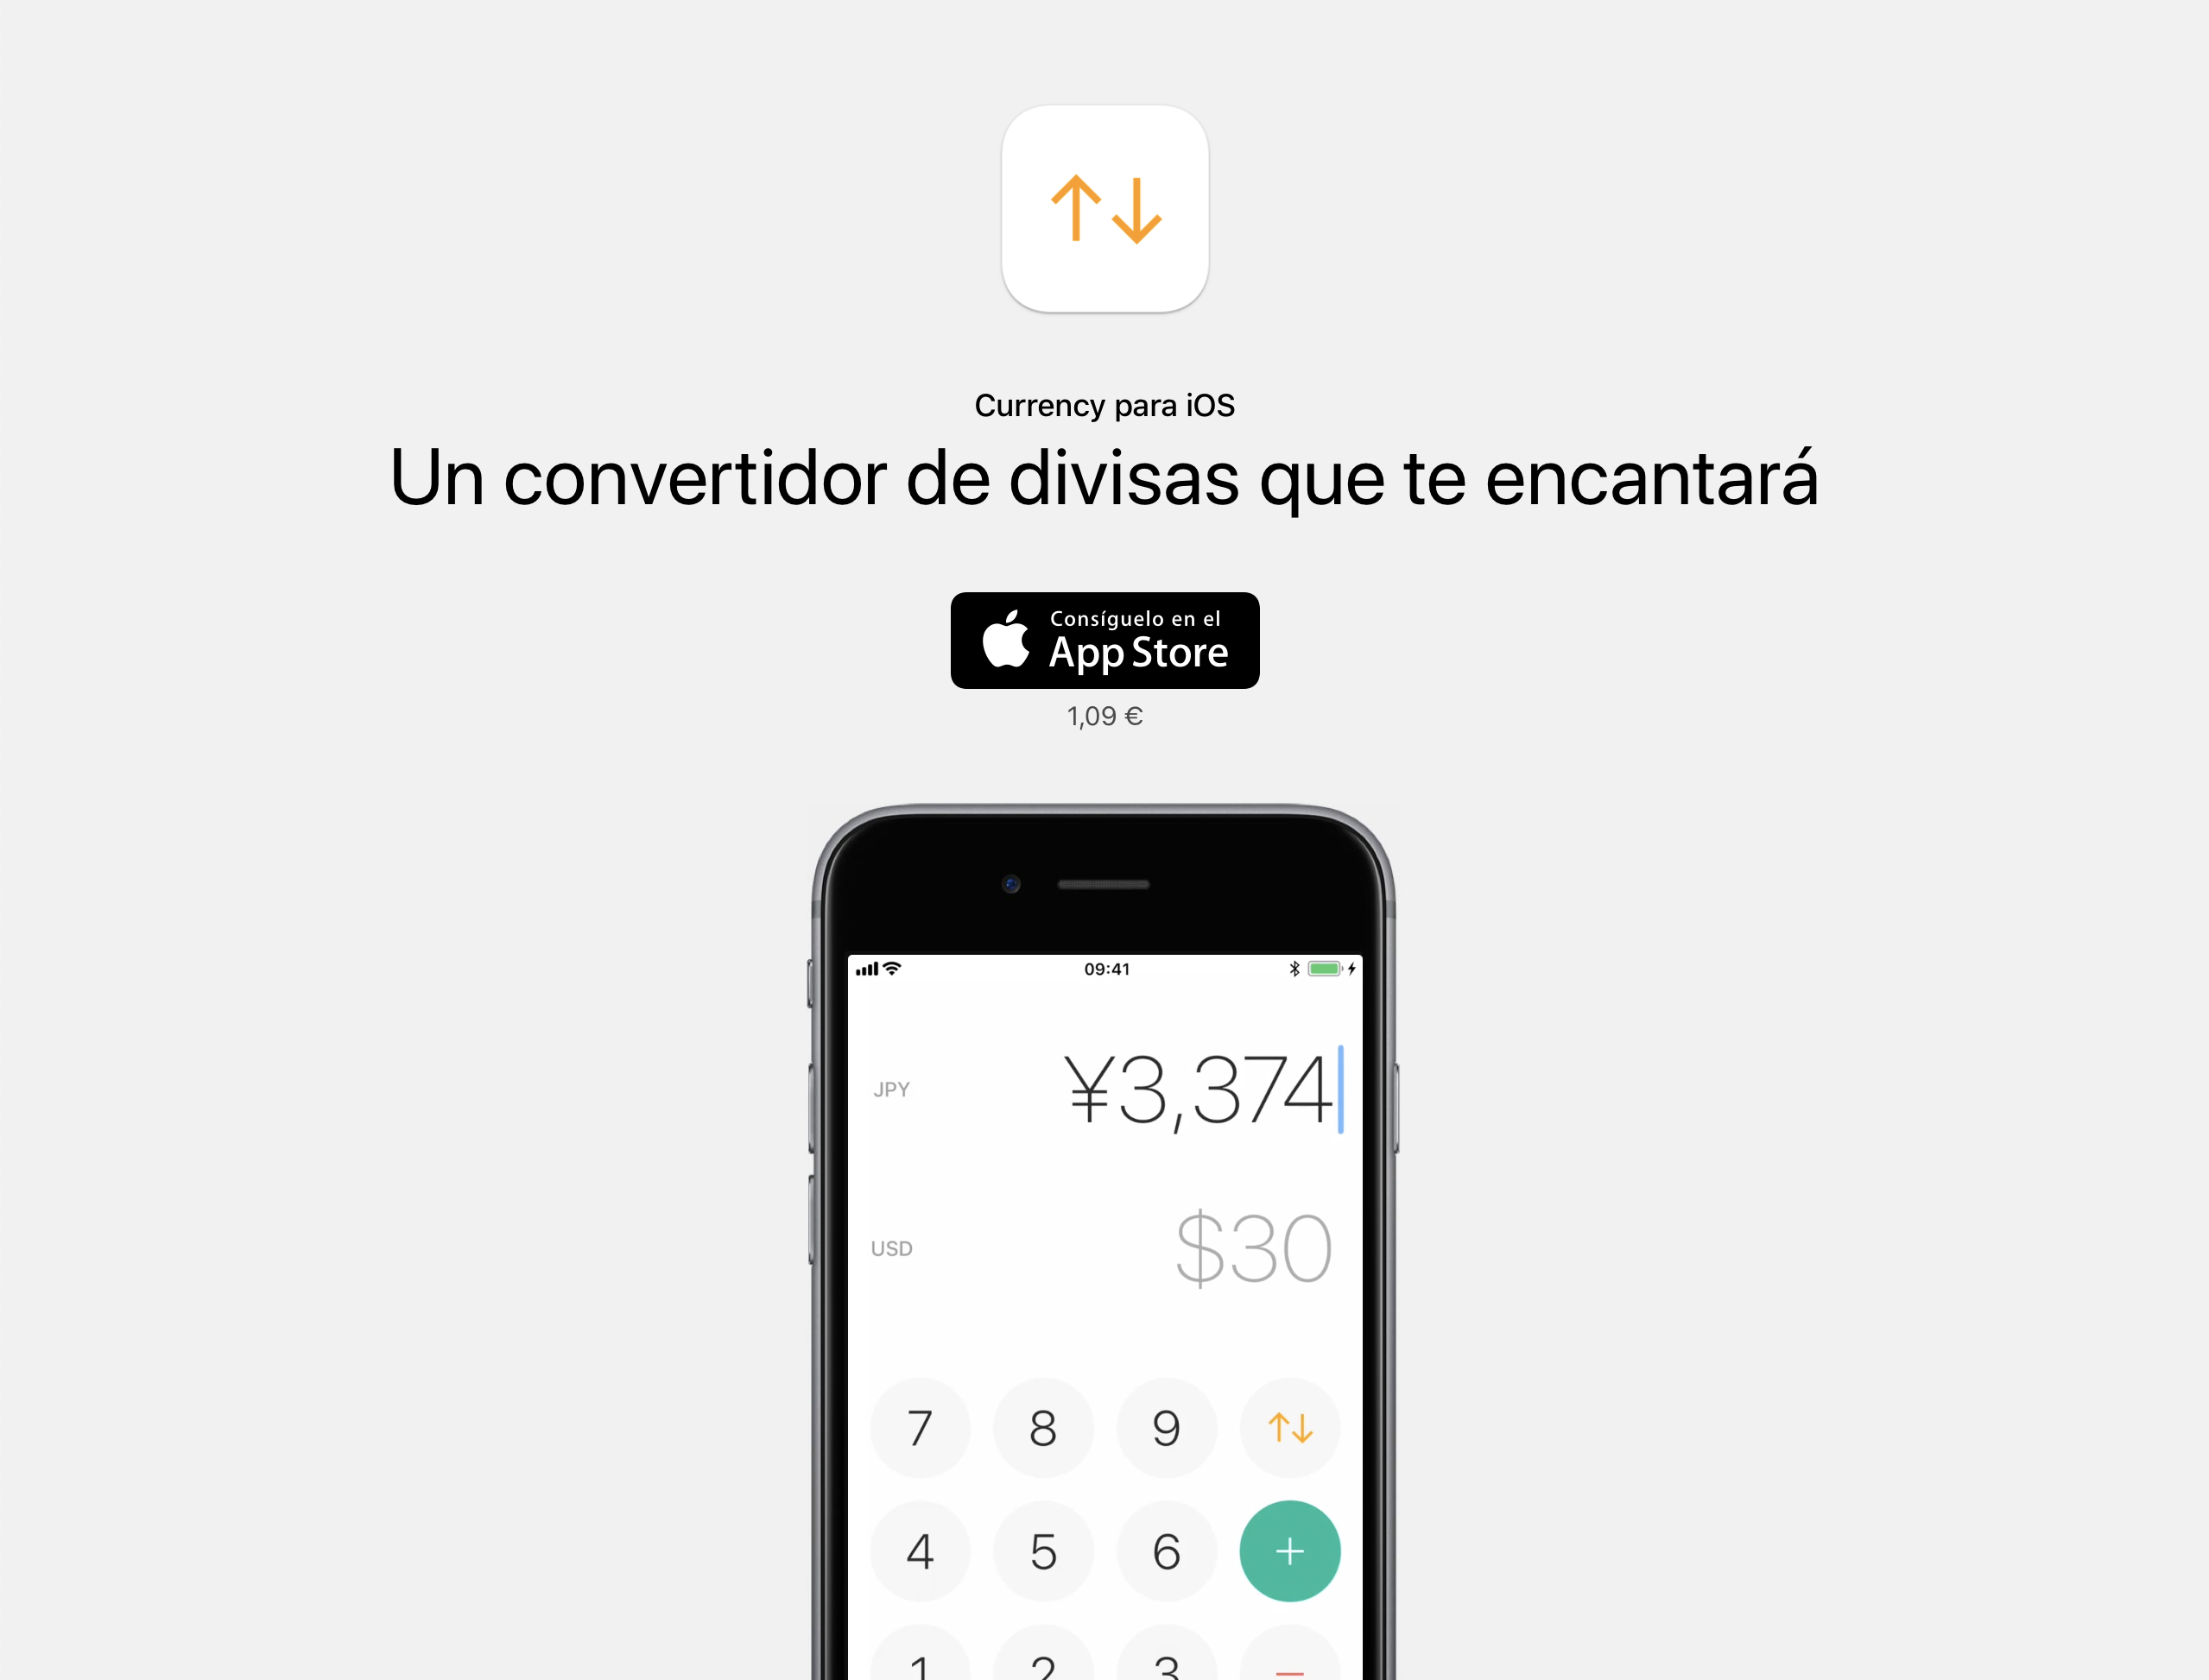 Currency website in Spanish